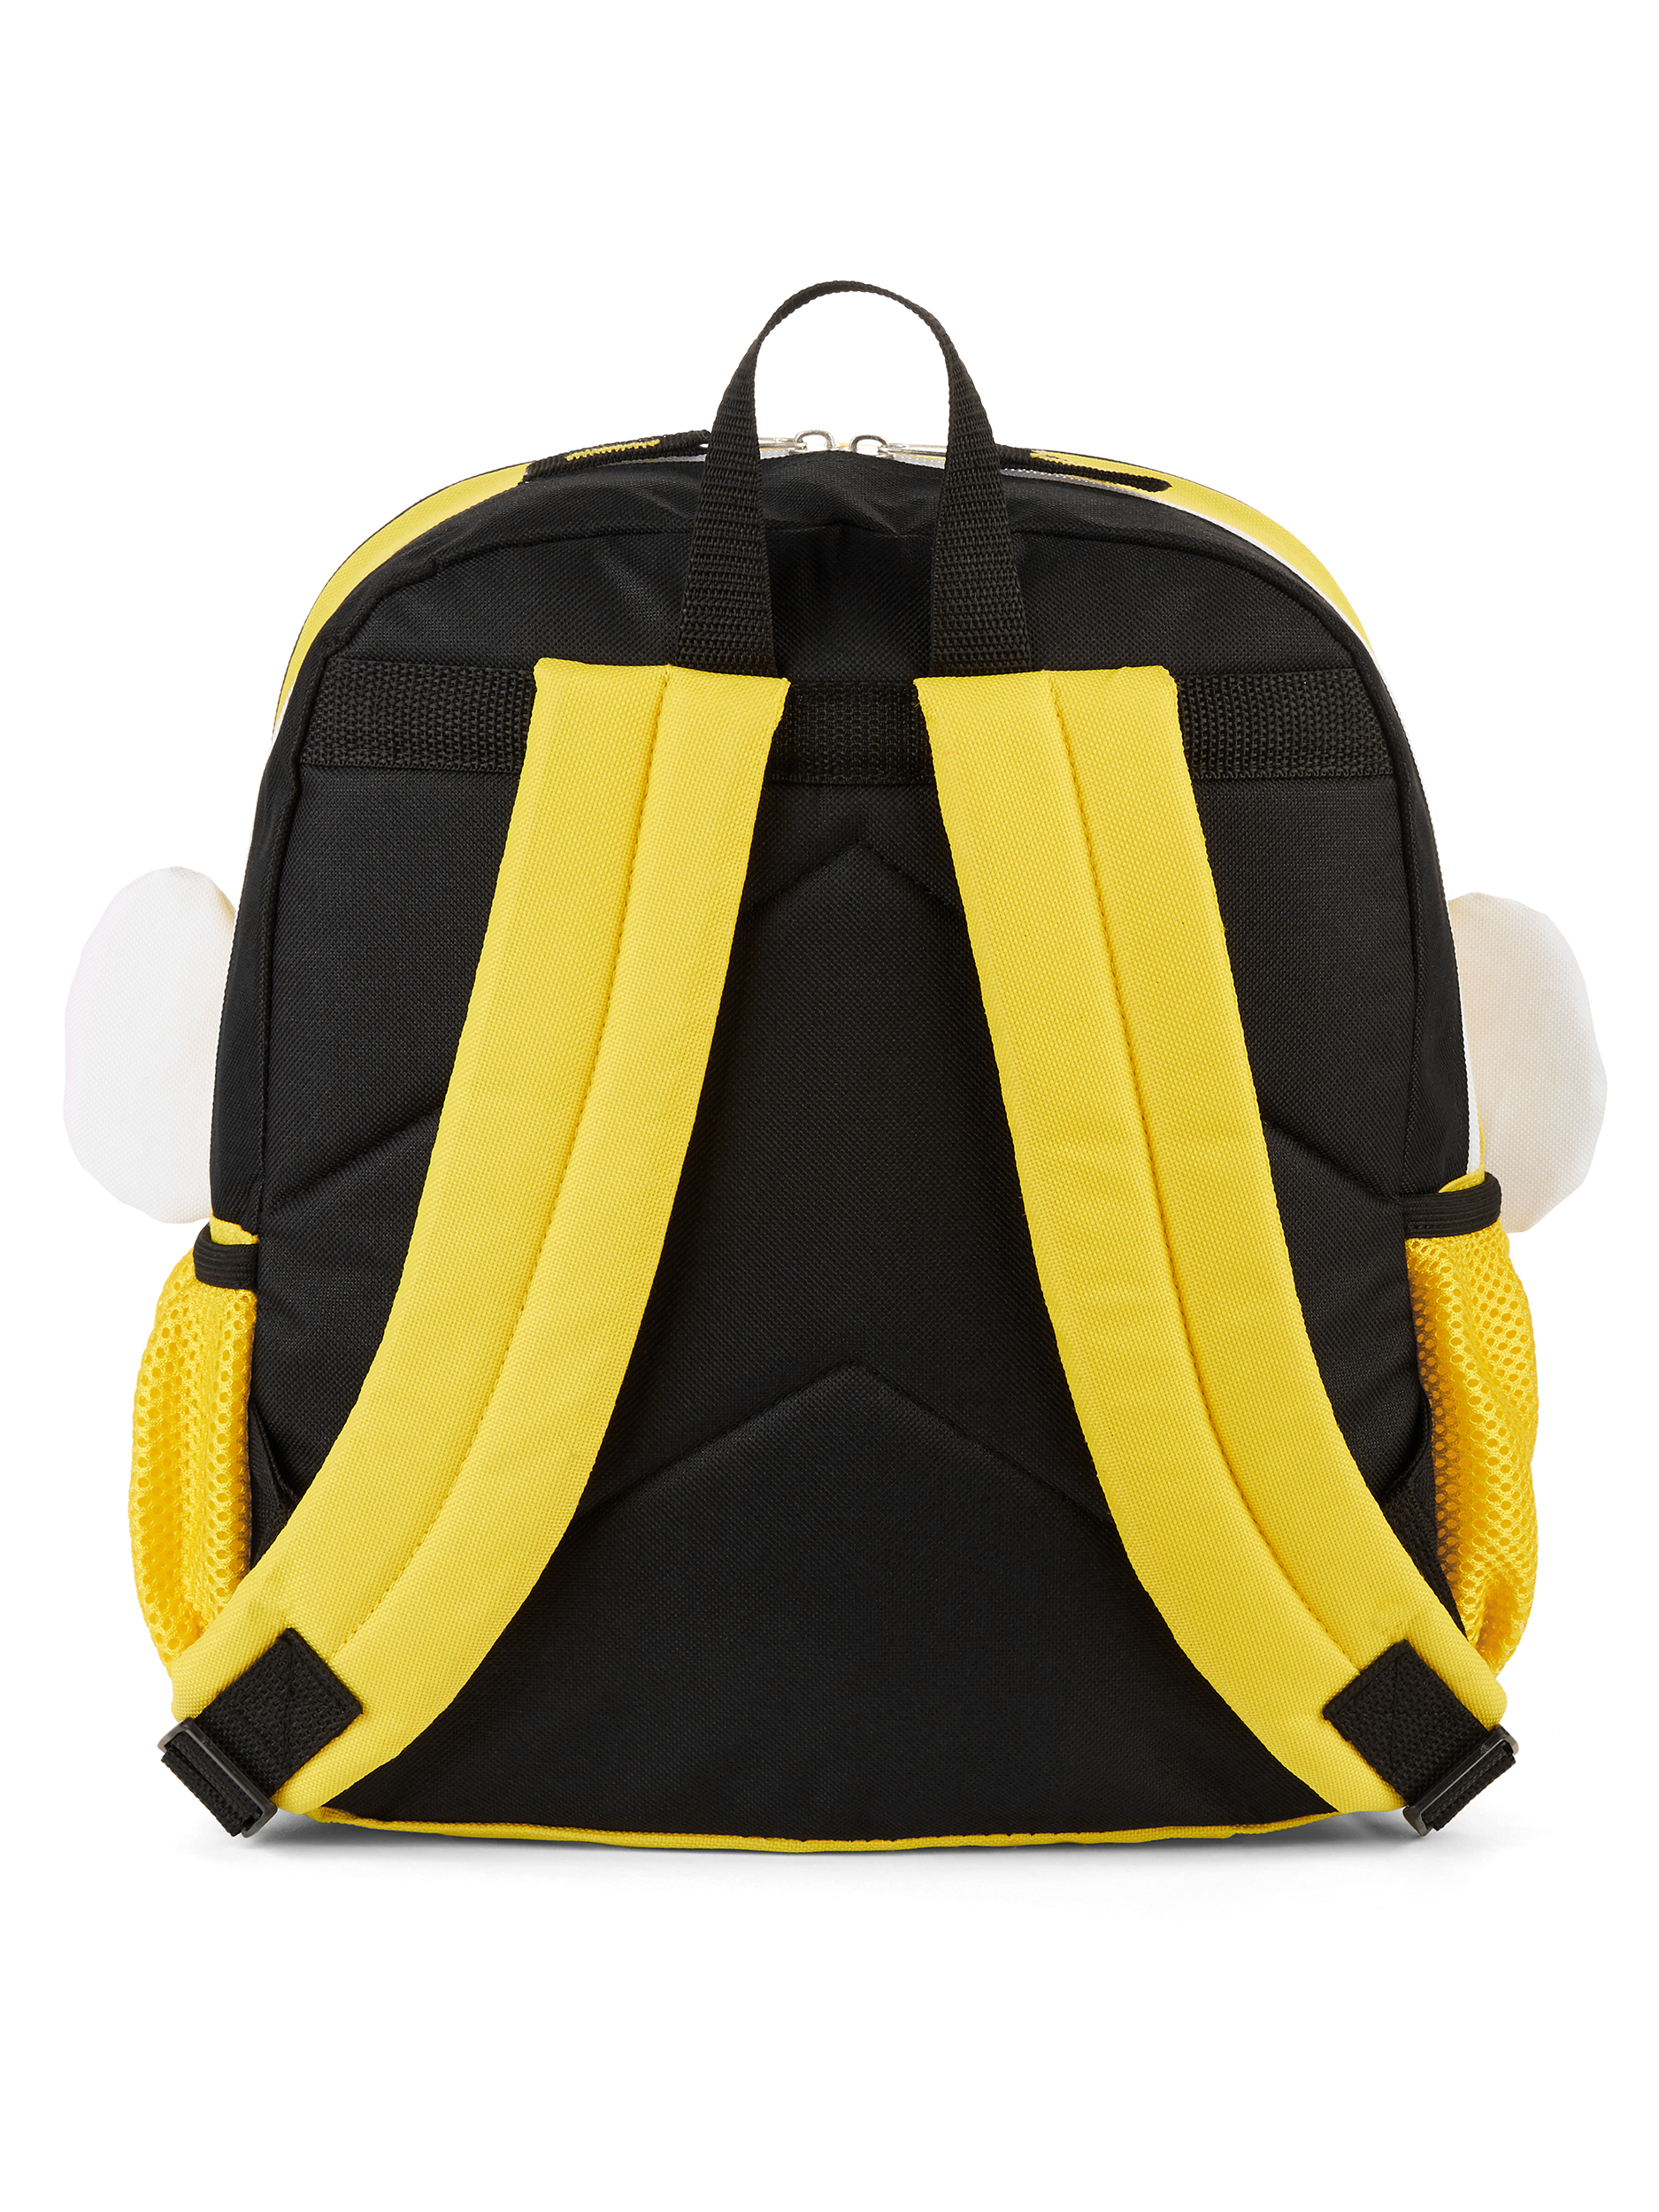 Wonder Nation Toddler Bumble Bee Critter Backpack - image 2 of 3